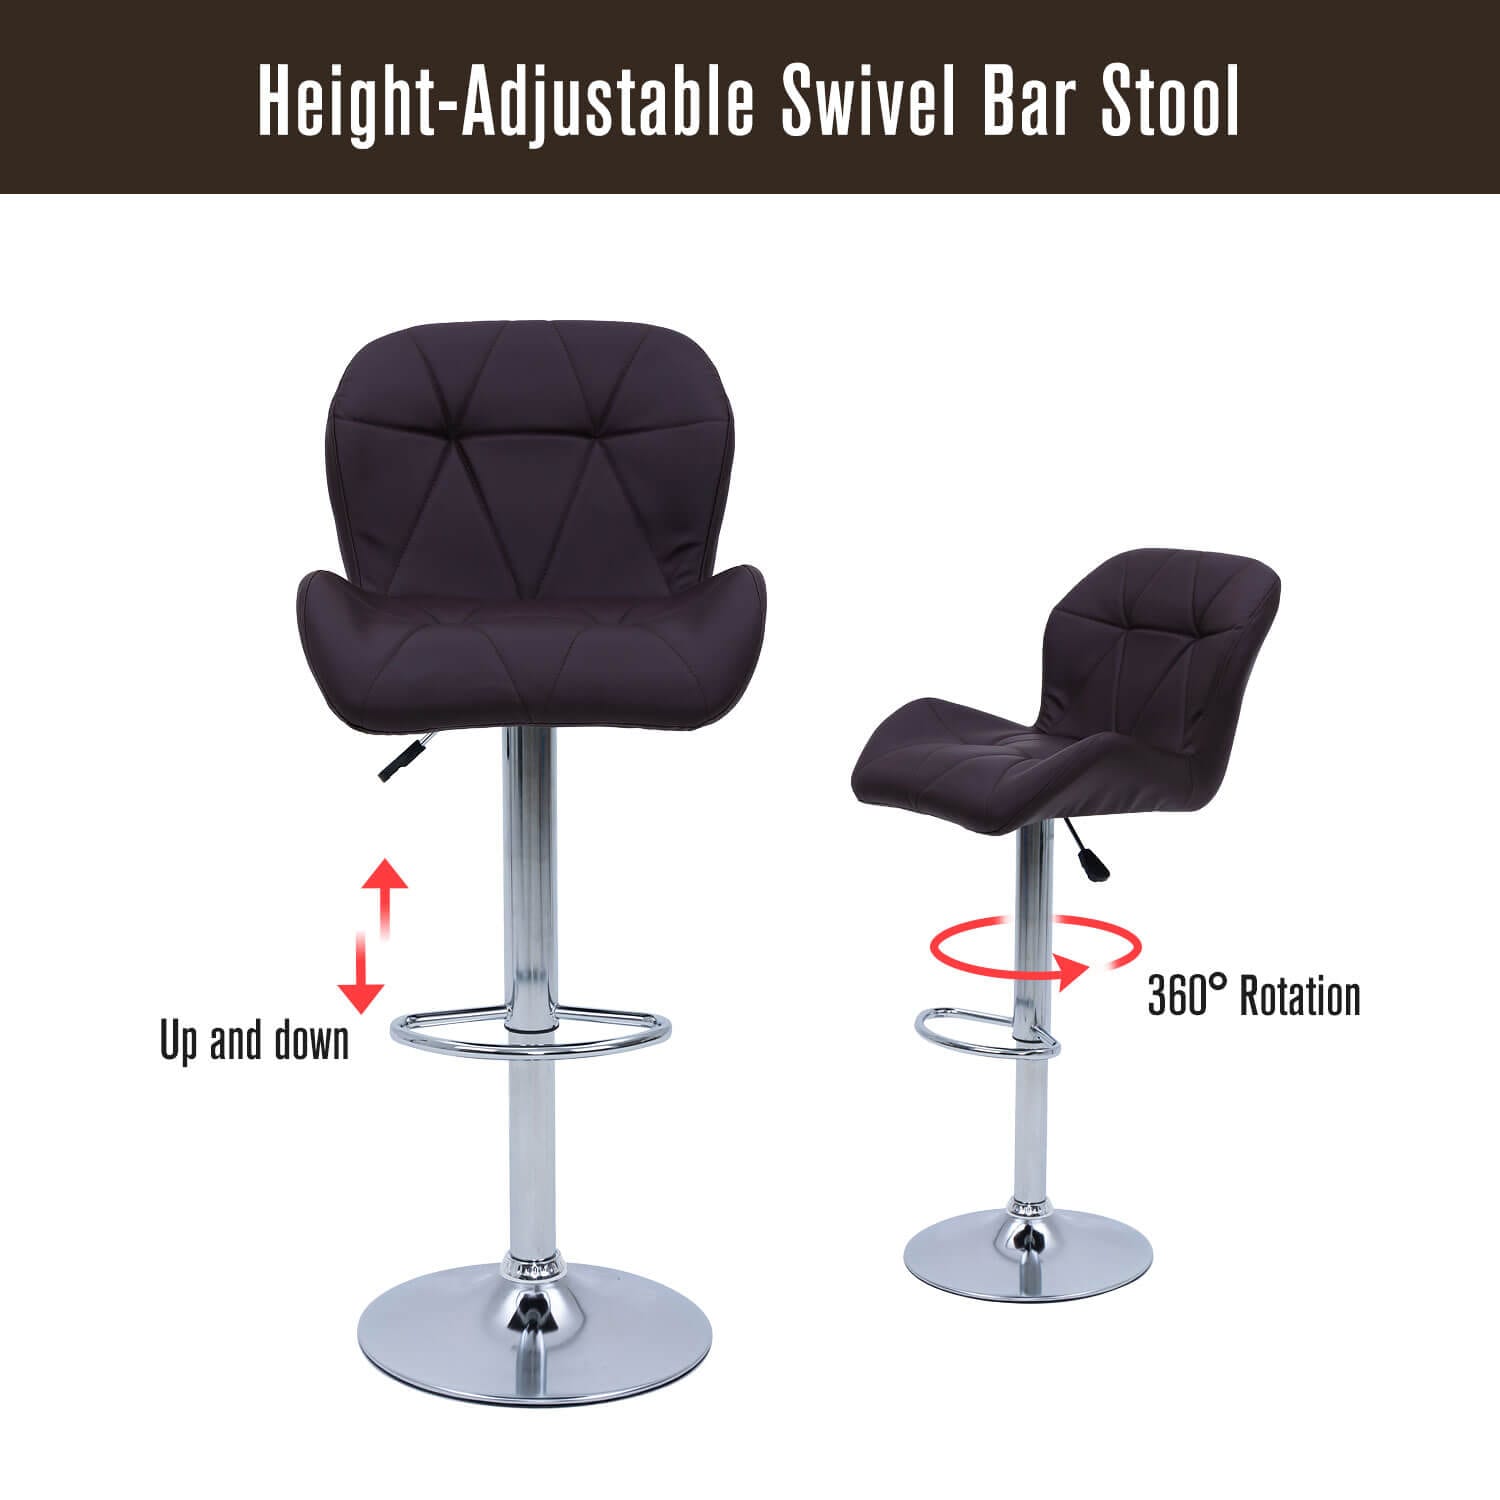 Elecwish Grid Brown Set of 2 Bar Stools OW010 is height-adjustable swivel bar stool